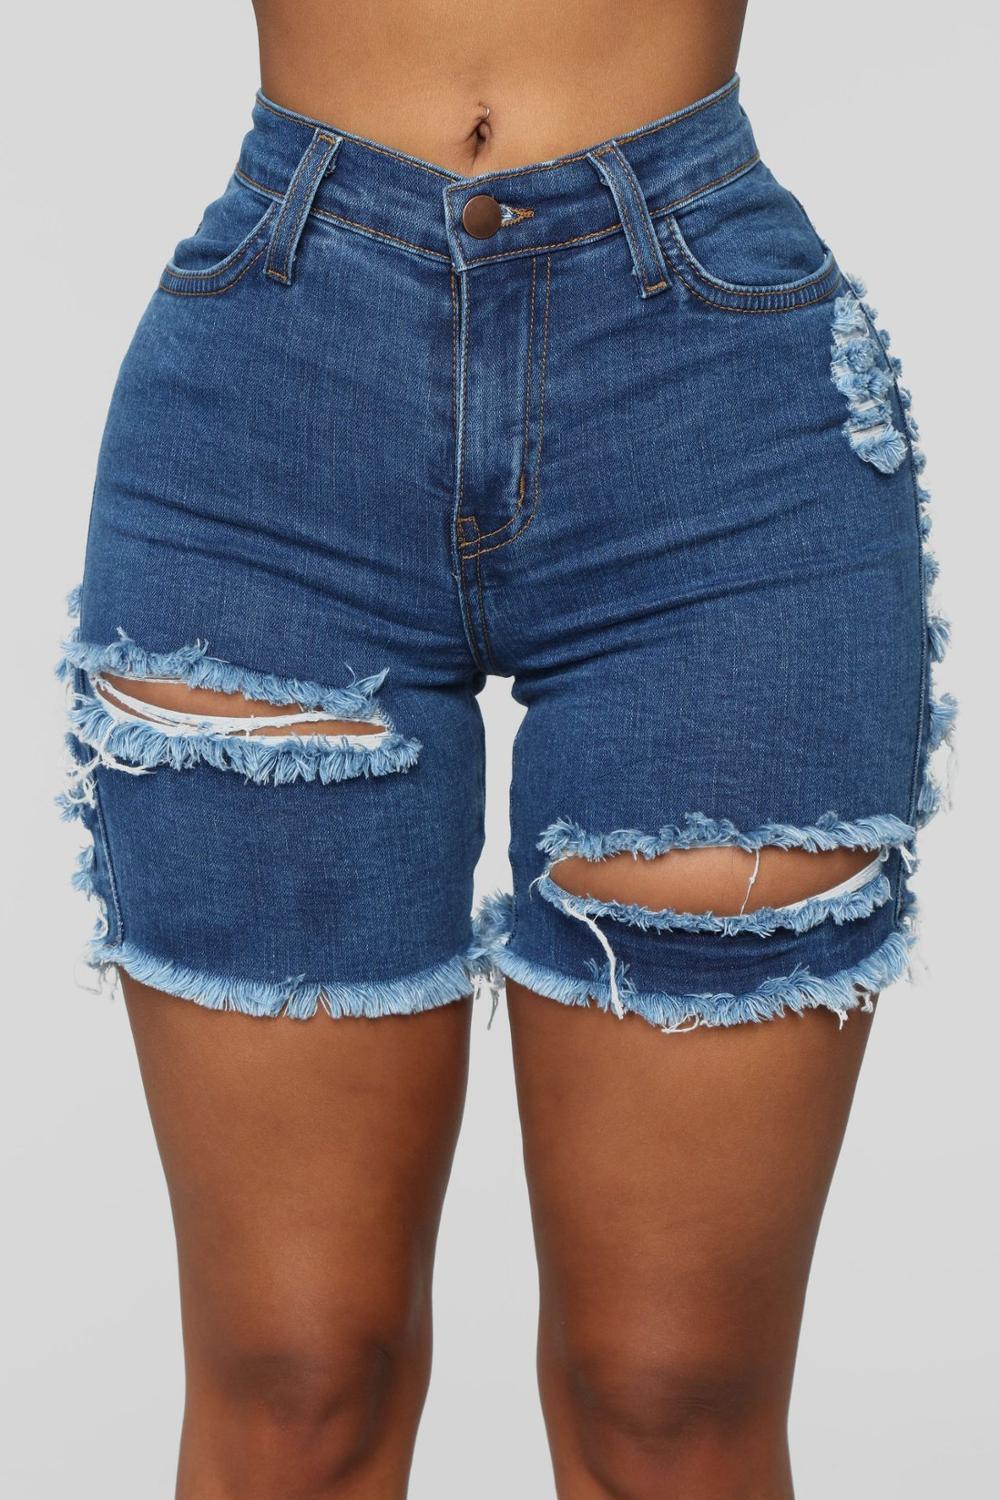 Summer woman trendy Ripped denim shorts fashion sexy high waist jeans shorts street hipster shorts clothes S-2XL 2020 new